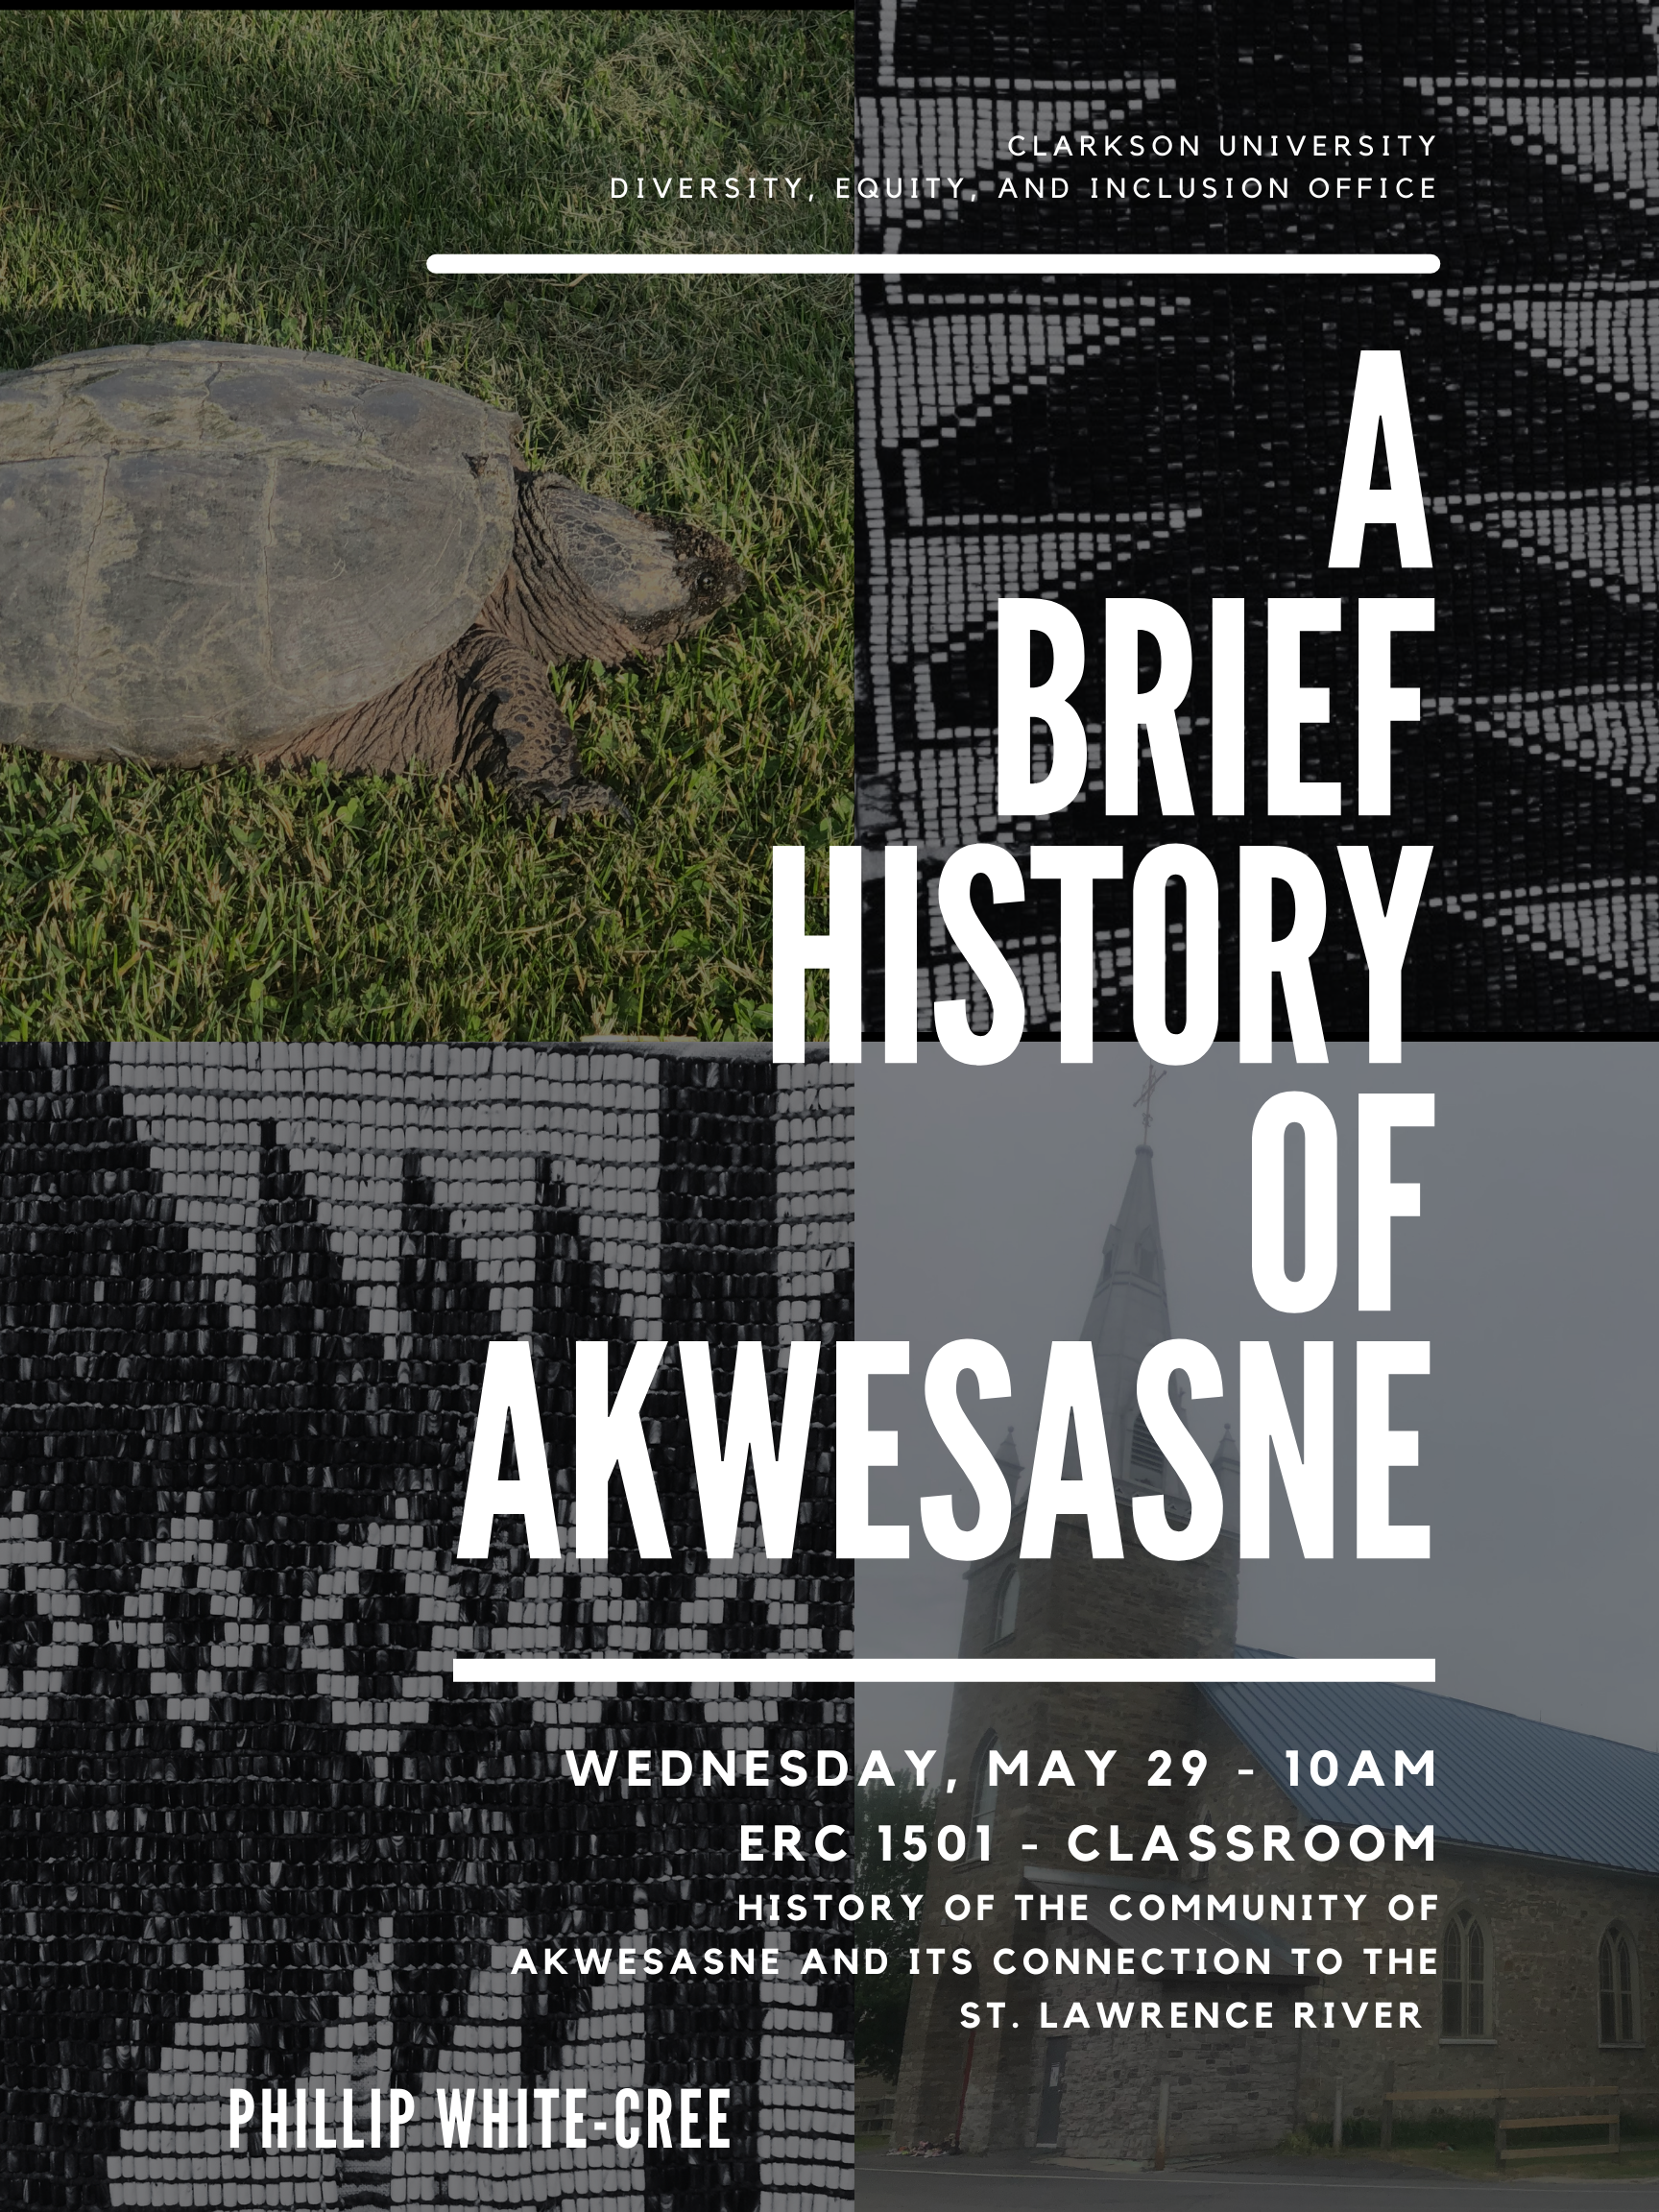 Flyer reading Clarkson University: Diversity, Equity, and Inclusion Office Presents A Brief History of Akwesasne Presentation Wednesday, May 29th, from 10-11 am in the ERC 1501 - Classroom Learn about the history of the community of Akwesasne and its connection to the St. Lawrence River. Presented by Phillip White-Cree.